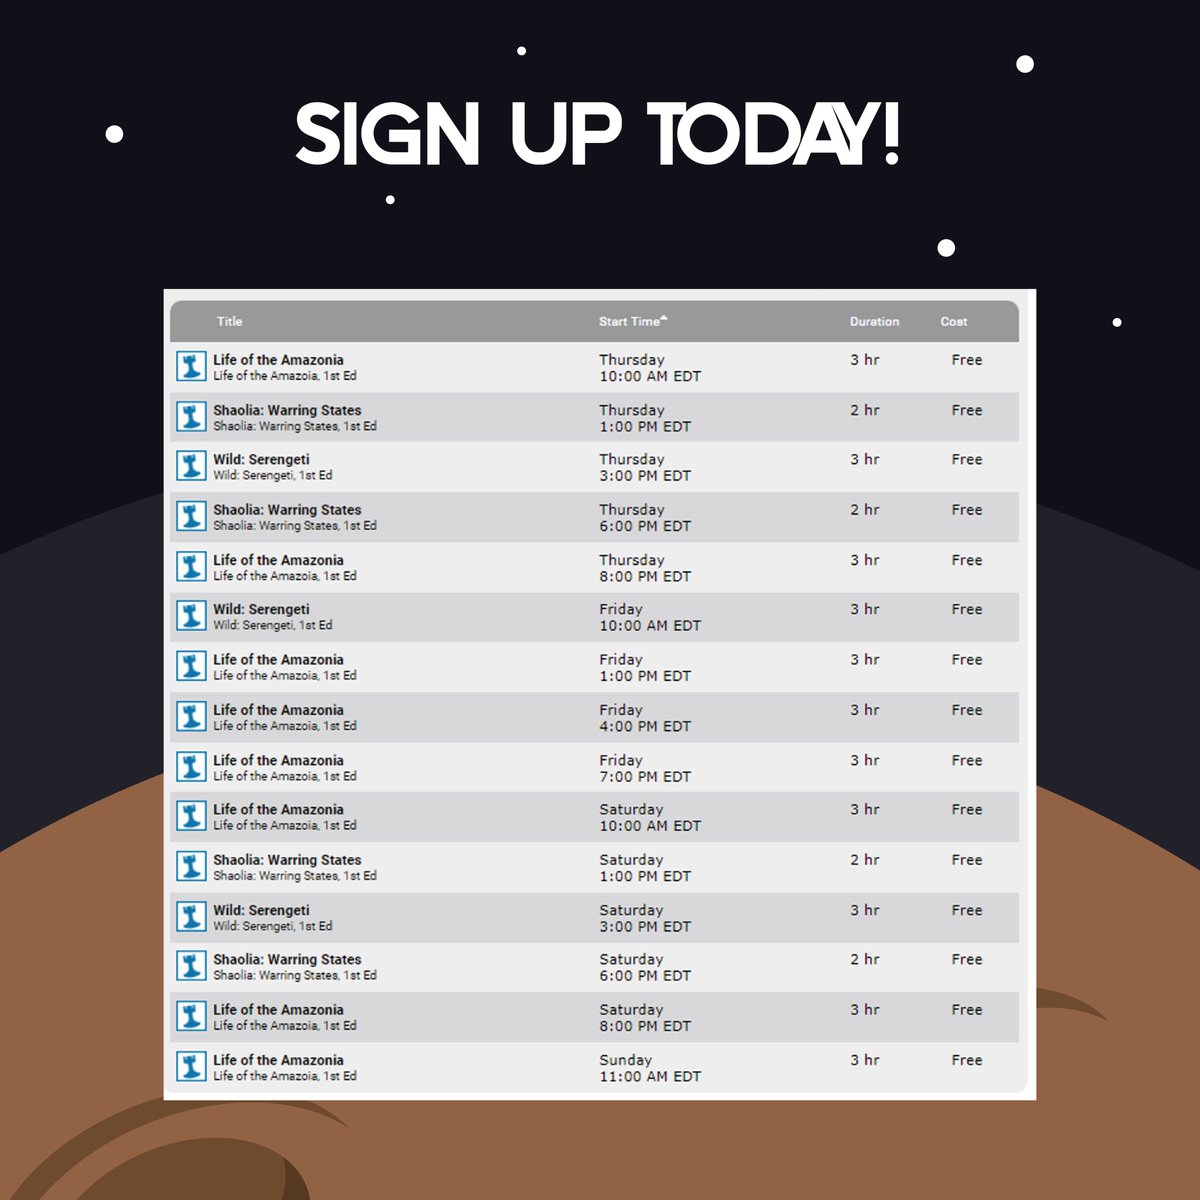 GenCon Events are open for signup today! Secure your seat to demo one of our titles today! gencon.com/events?host=Ba…